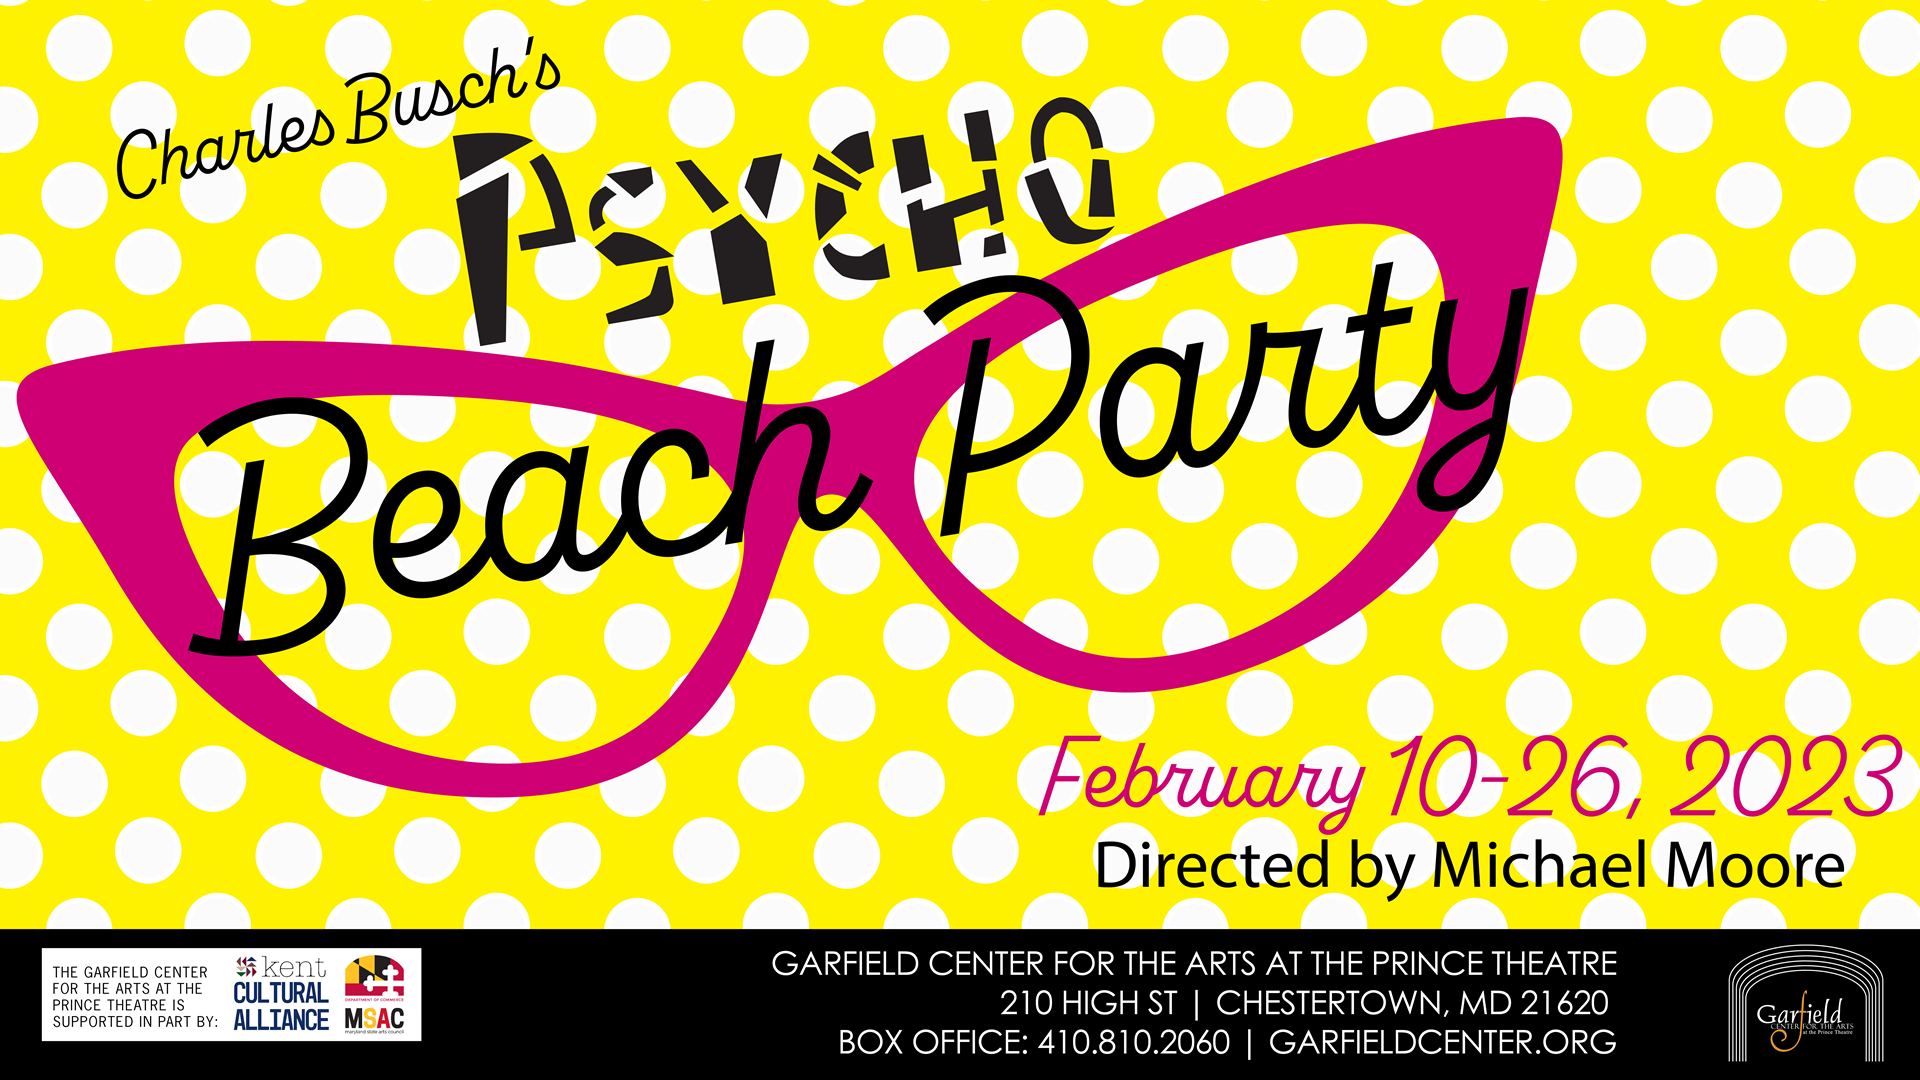 The Garfield presents Psycho Beach Party